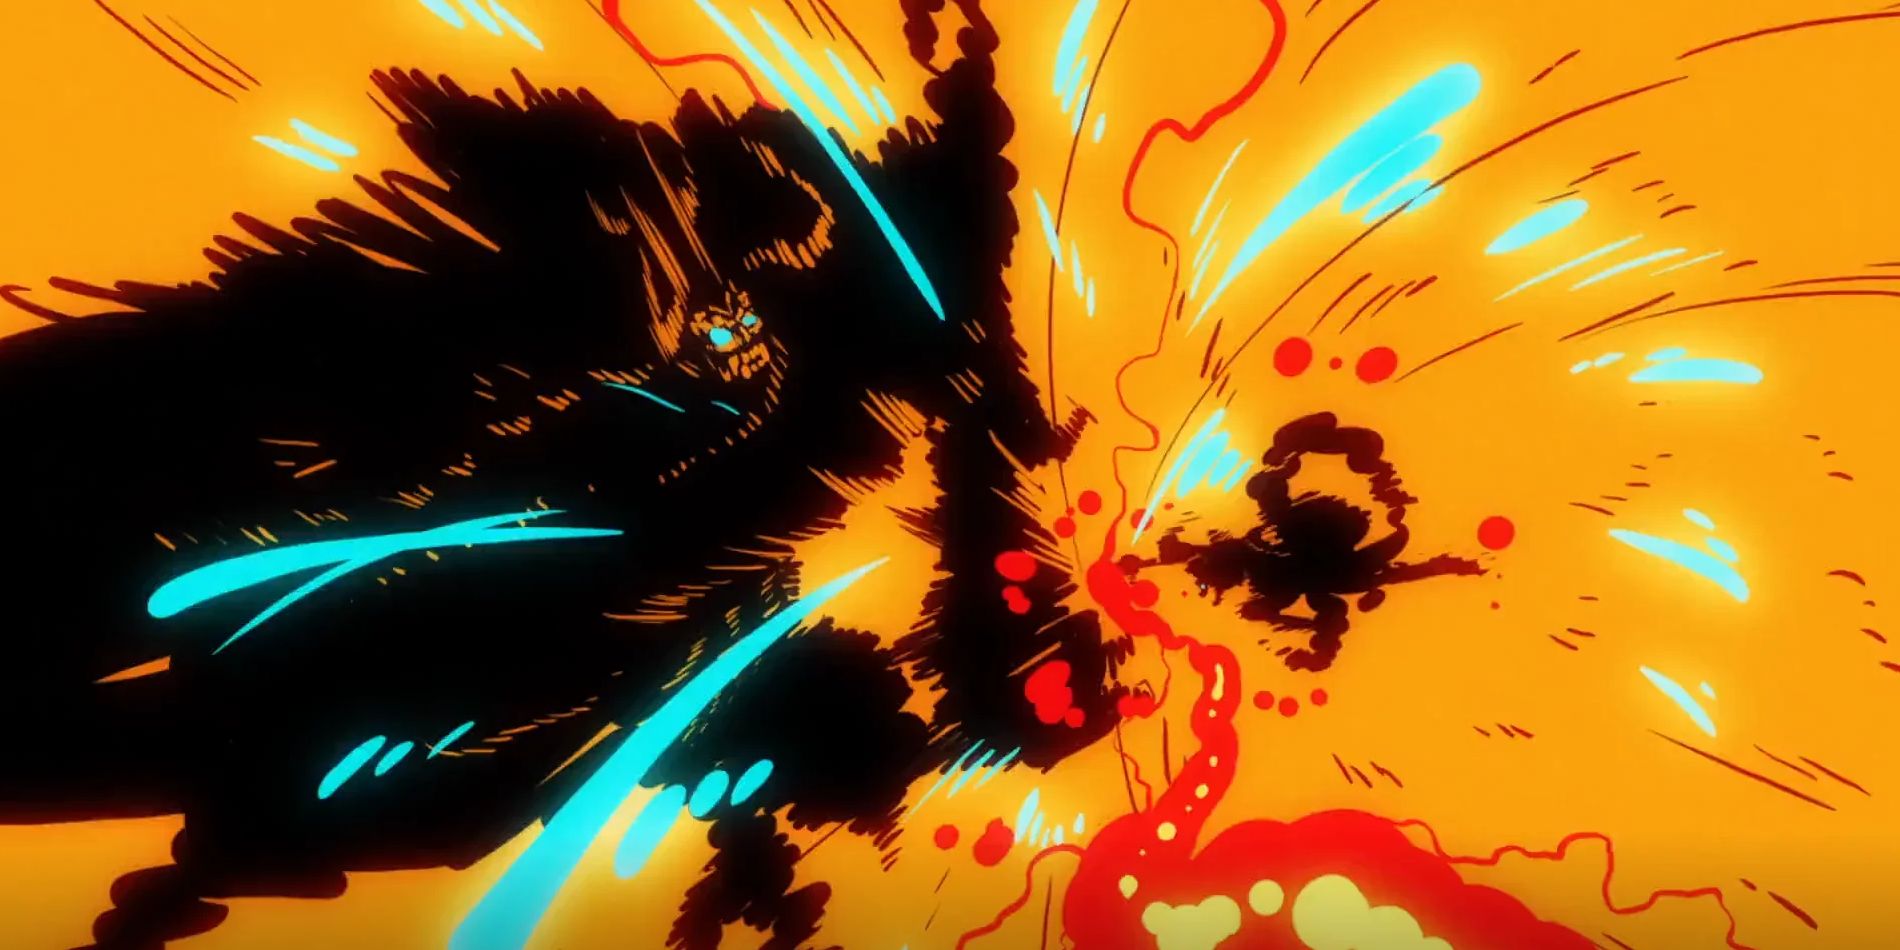 Screenshot from One Piece anime #1028 shows an impact frame of Kaido and Luffy clashing with Luffy's silhouette resembling his Fifth Gear transformation.